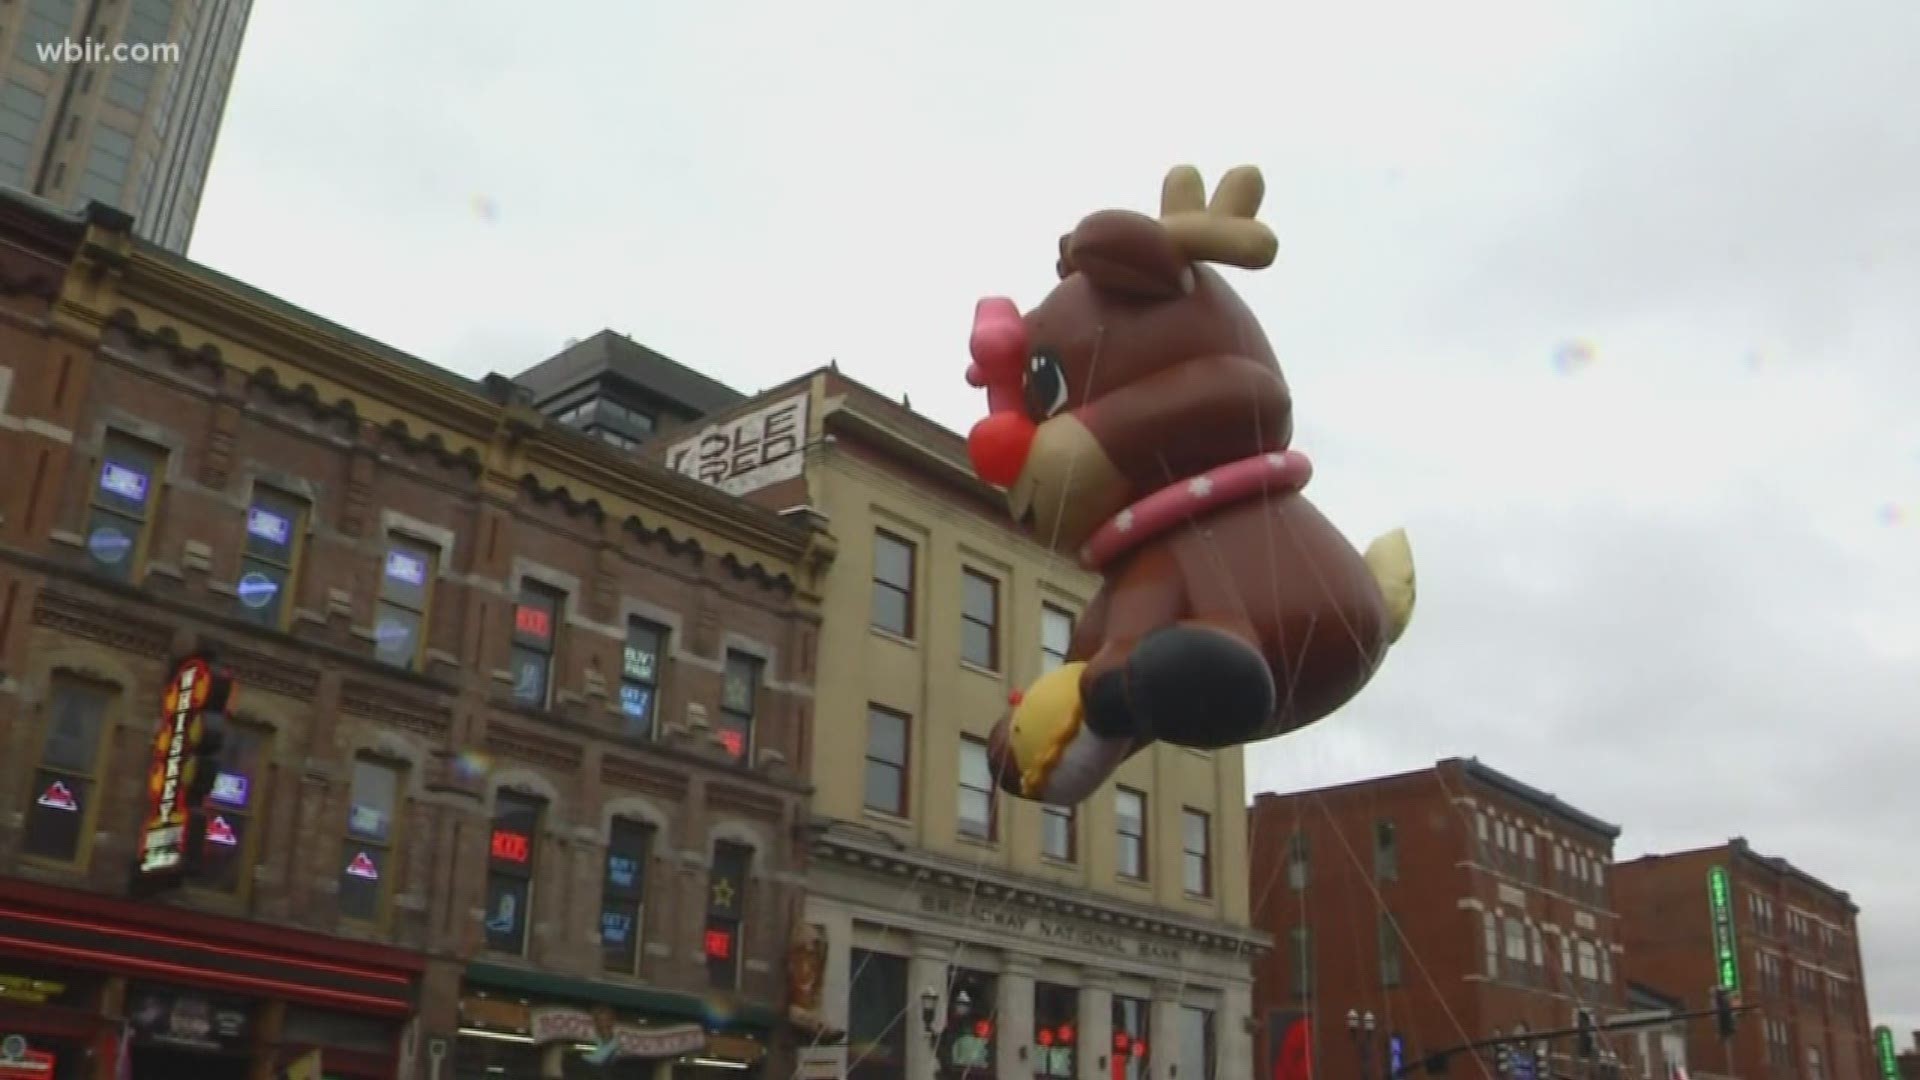 The Nashville Christmas parade rolled out Saturday morning without a hit after controversy leading up to the event.